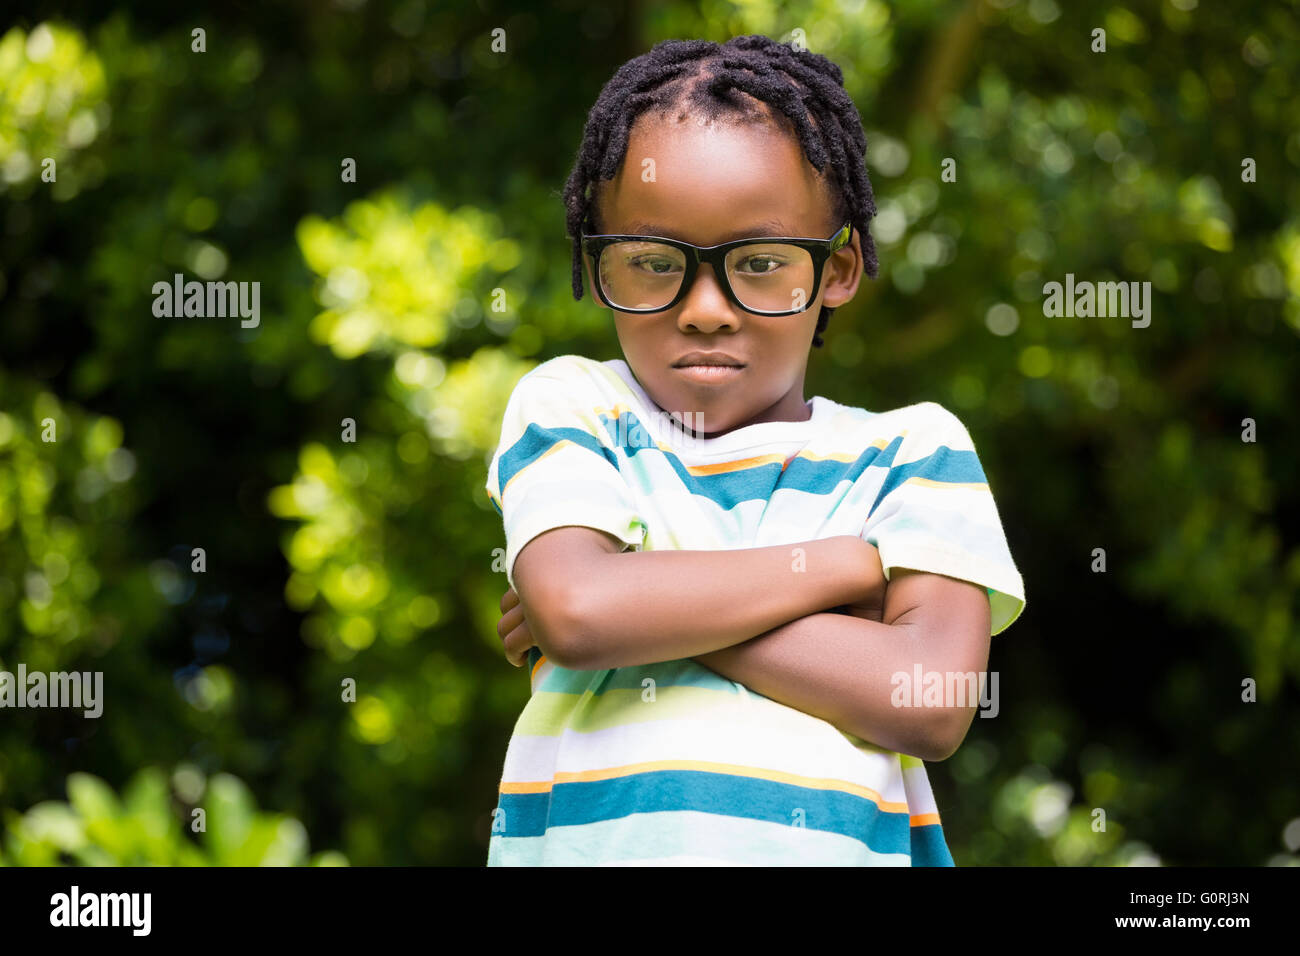 A kid posing with his arms crossed Stock Photo